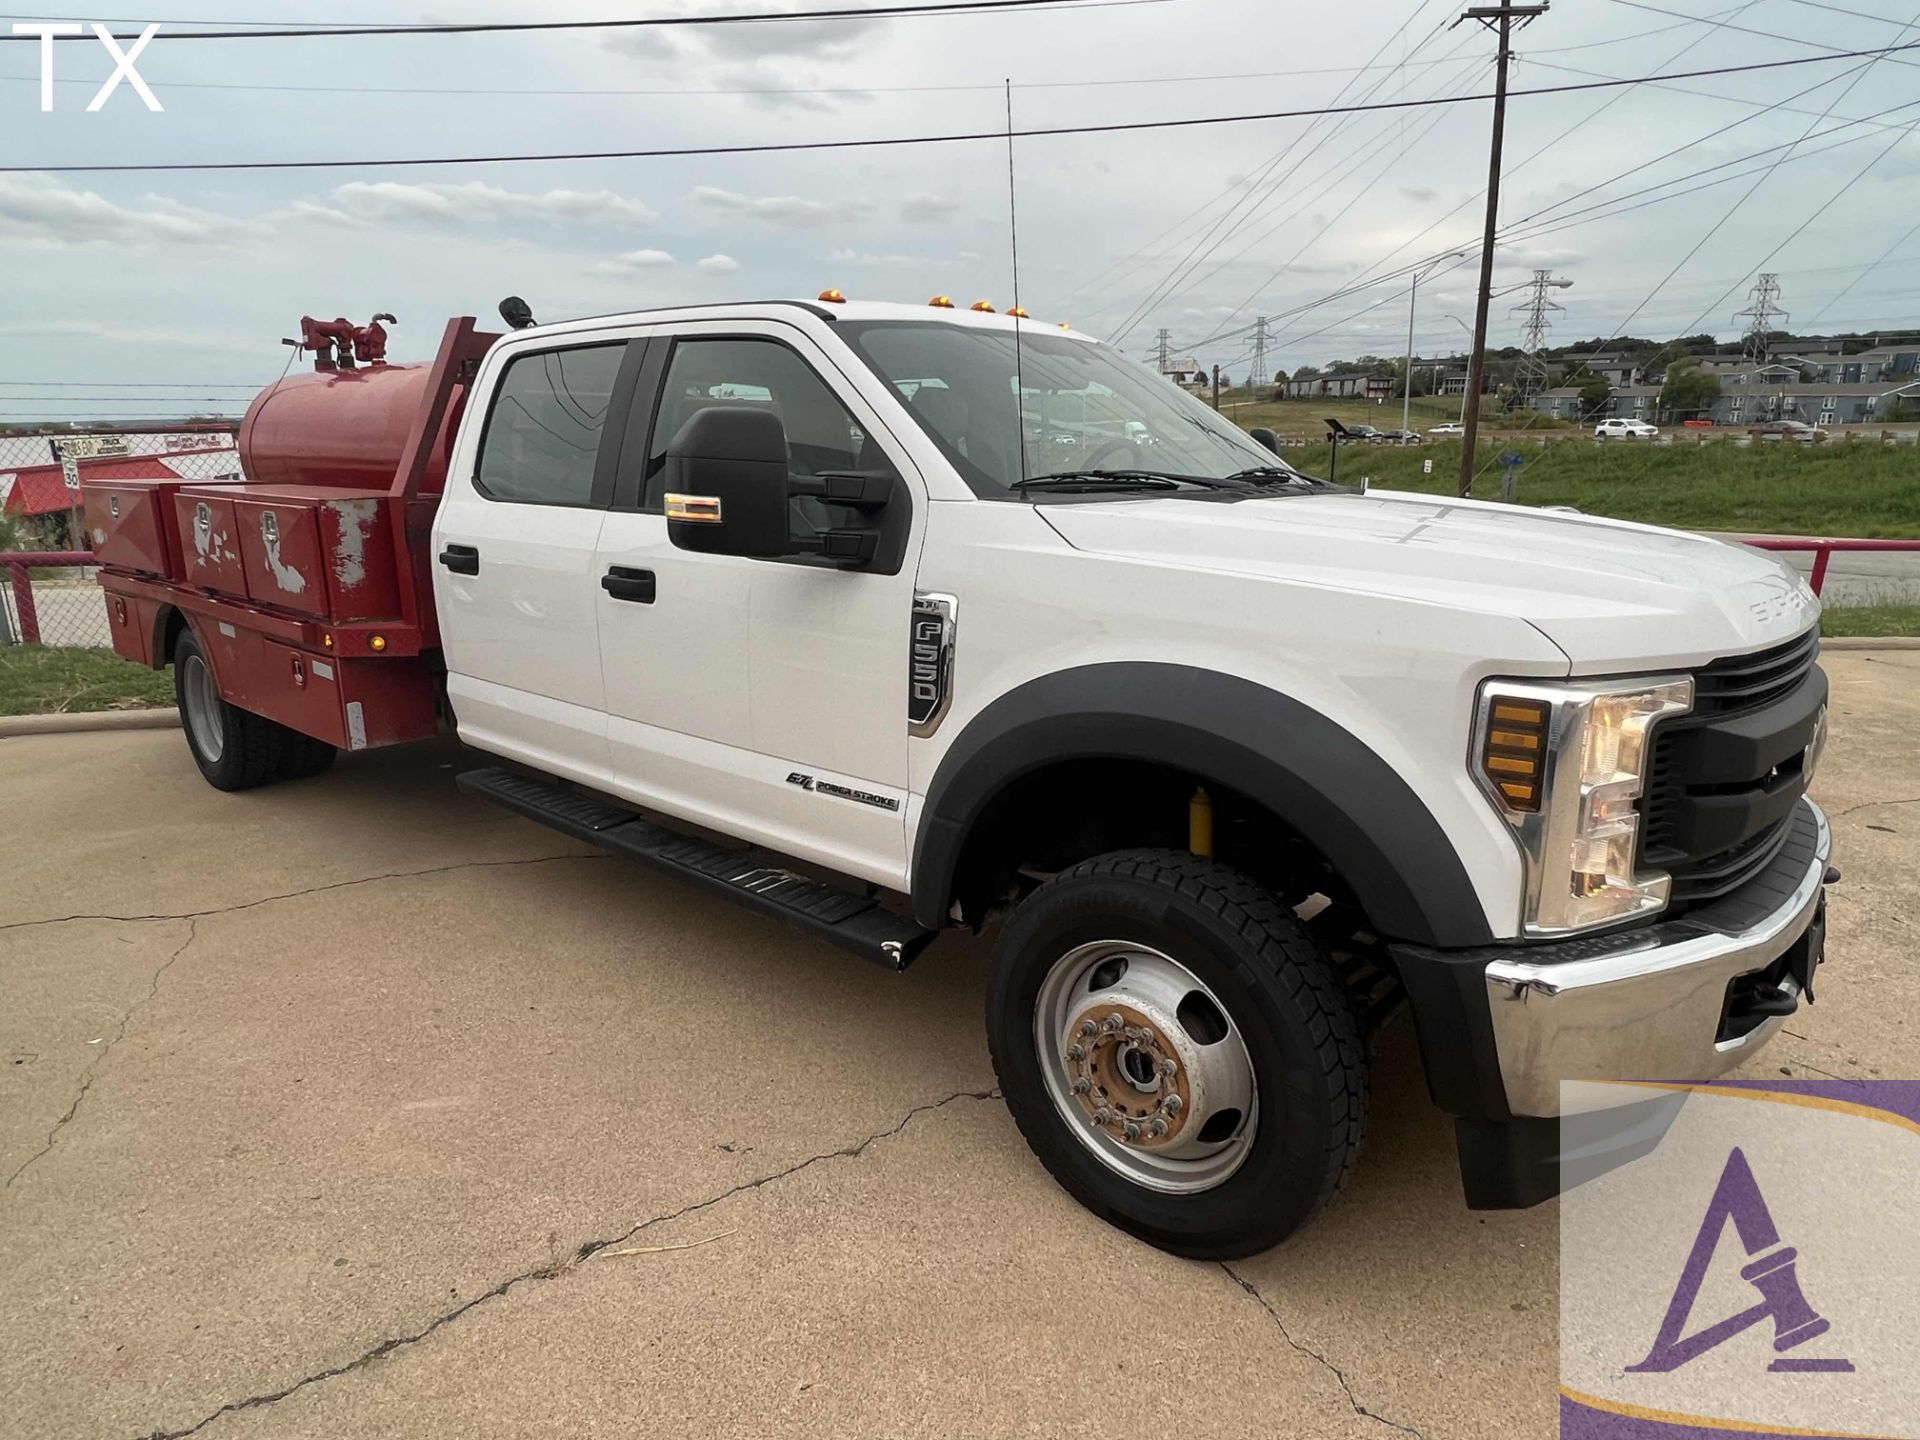 2019 Ford F550 4x4 Crew Cab Fuel Truck, Ingersoll-Rand Air Compressor, Toolboxes! - Image 2 of 20